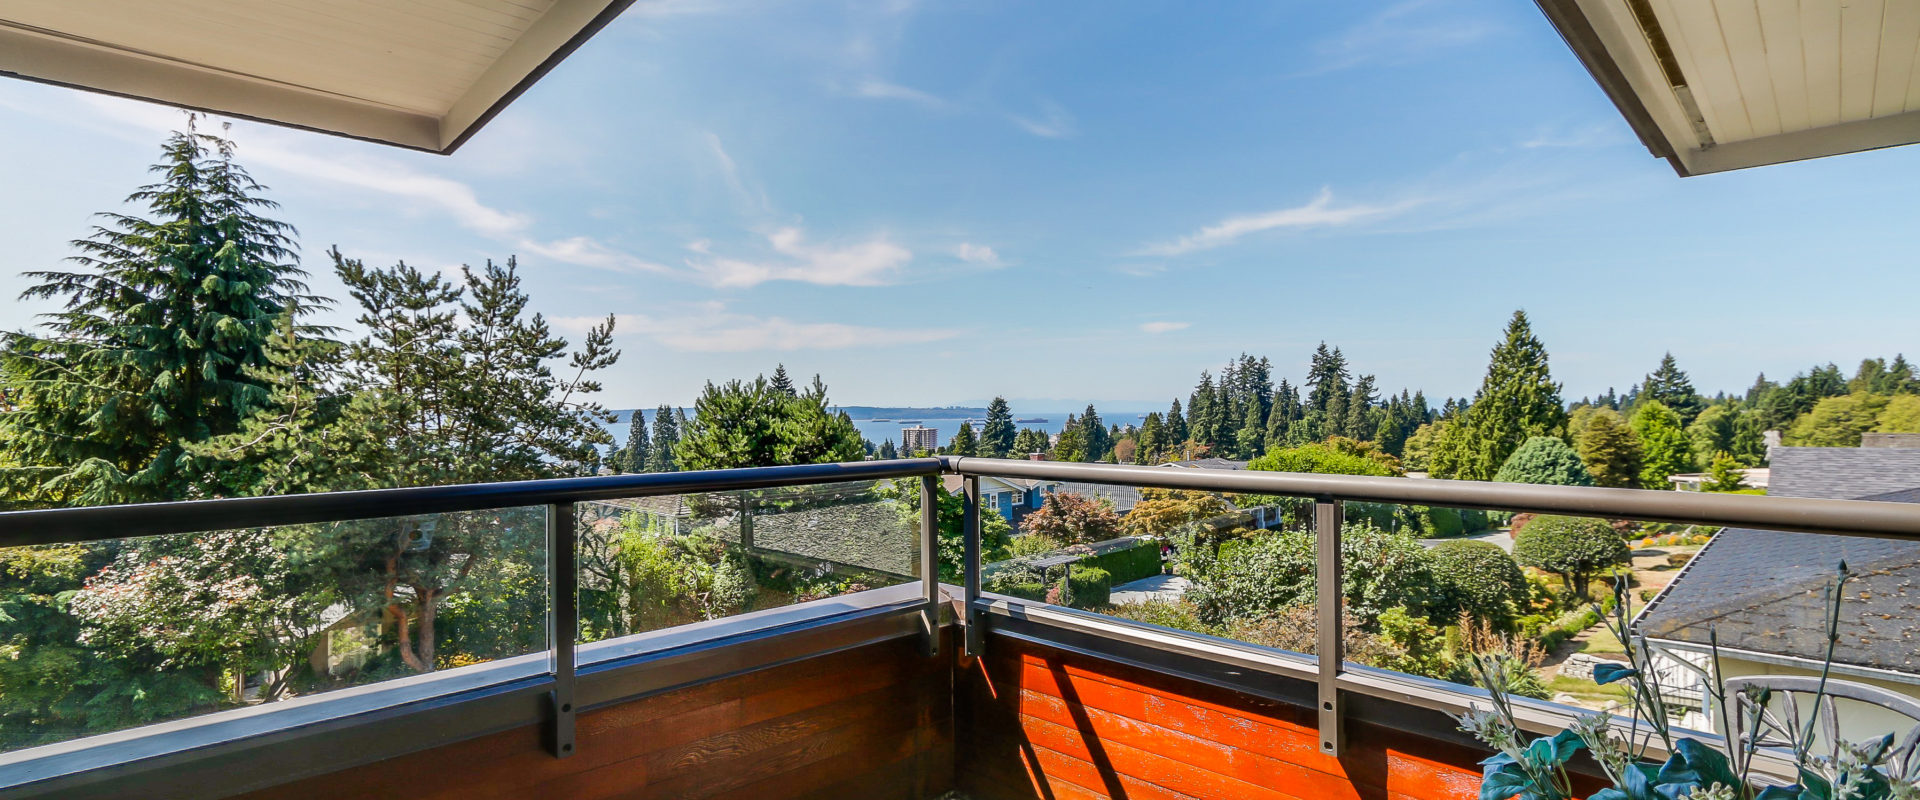 Ocean view house 1141 Lawson Ave, West Vancouver